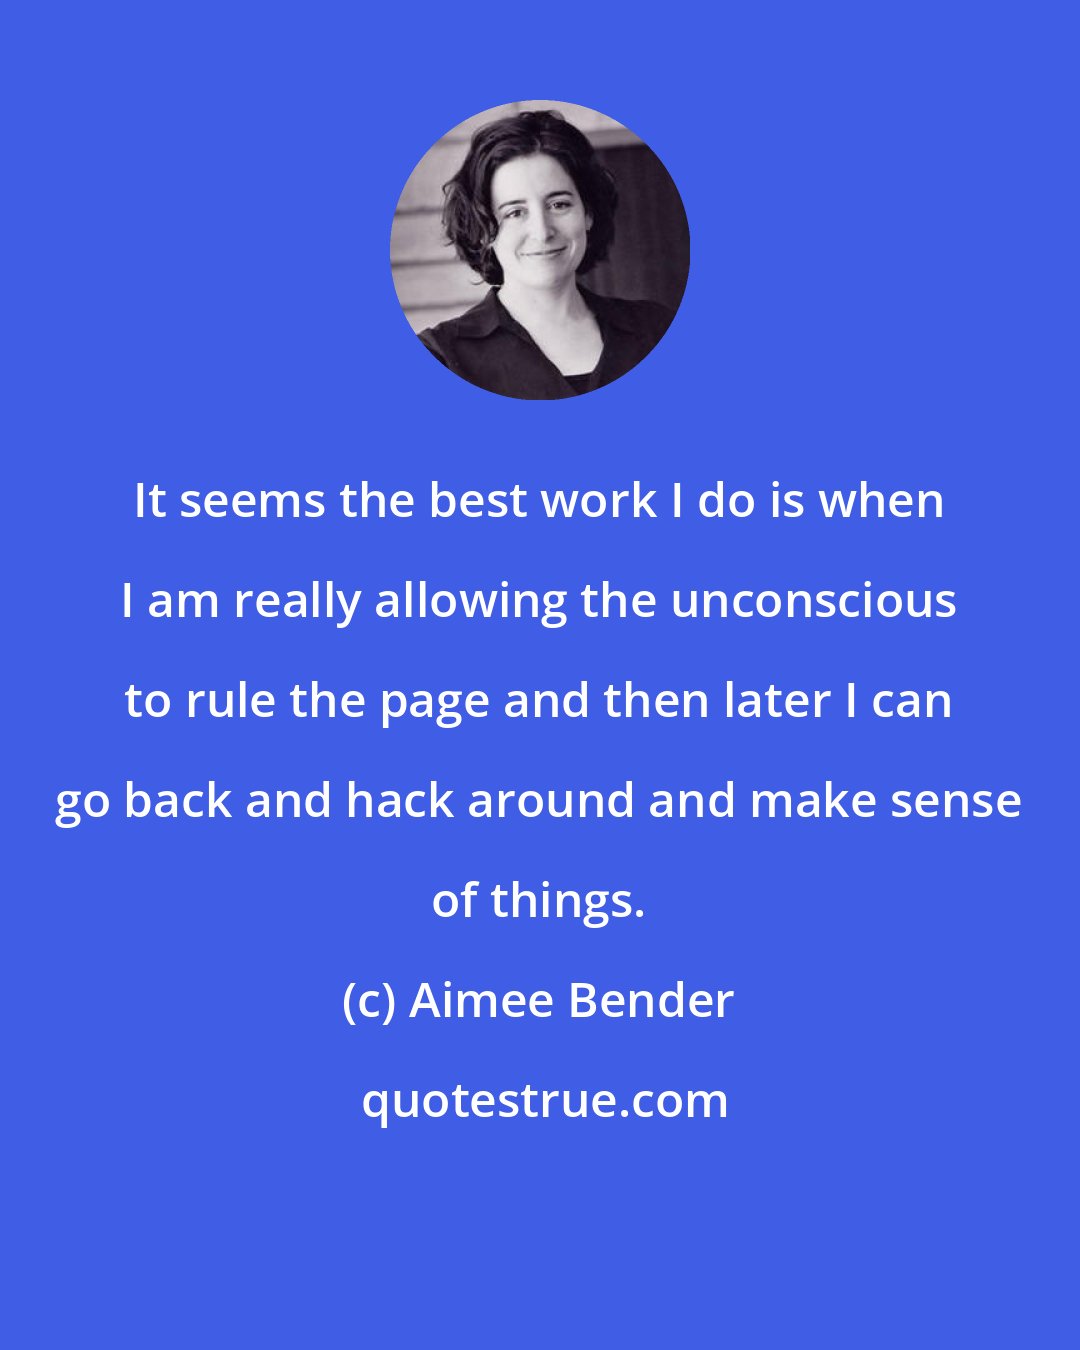 Aimee Bender: It seems the best work I do is when I am really allowing the unconscious to rule the page and then later I can go back and hack around and make sense of things.